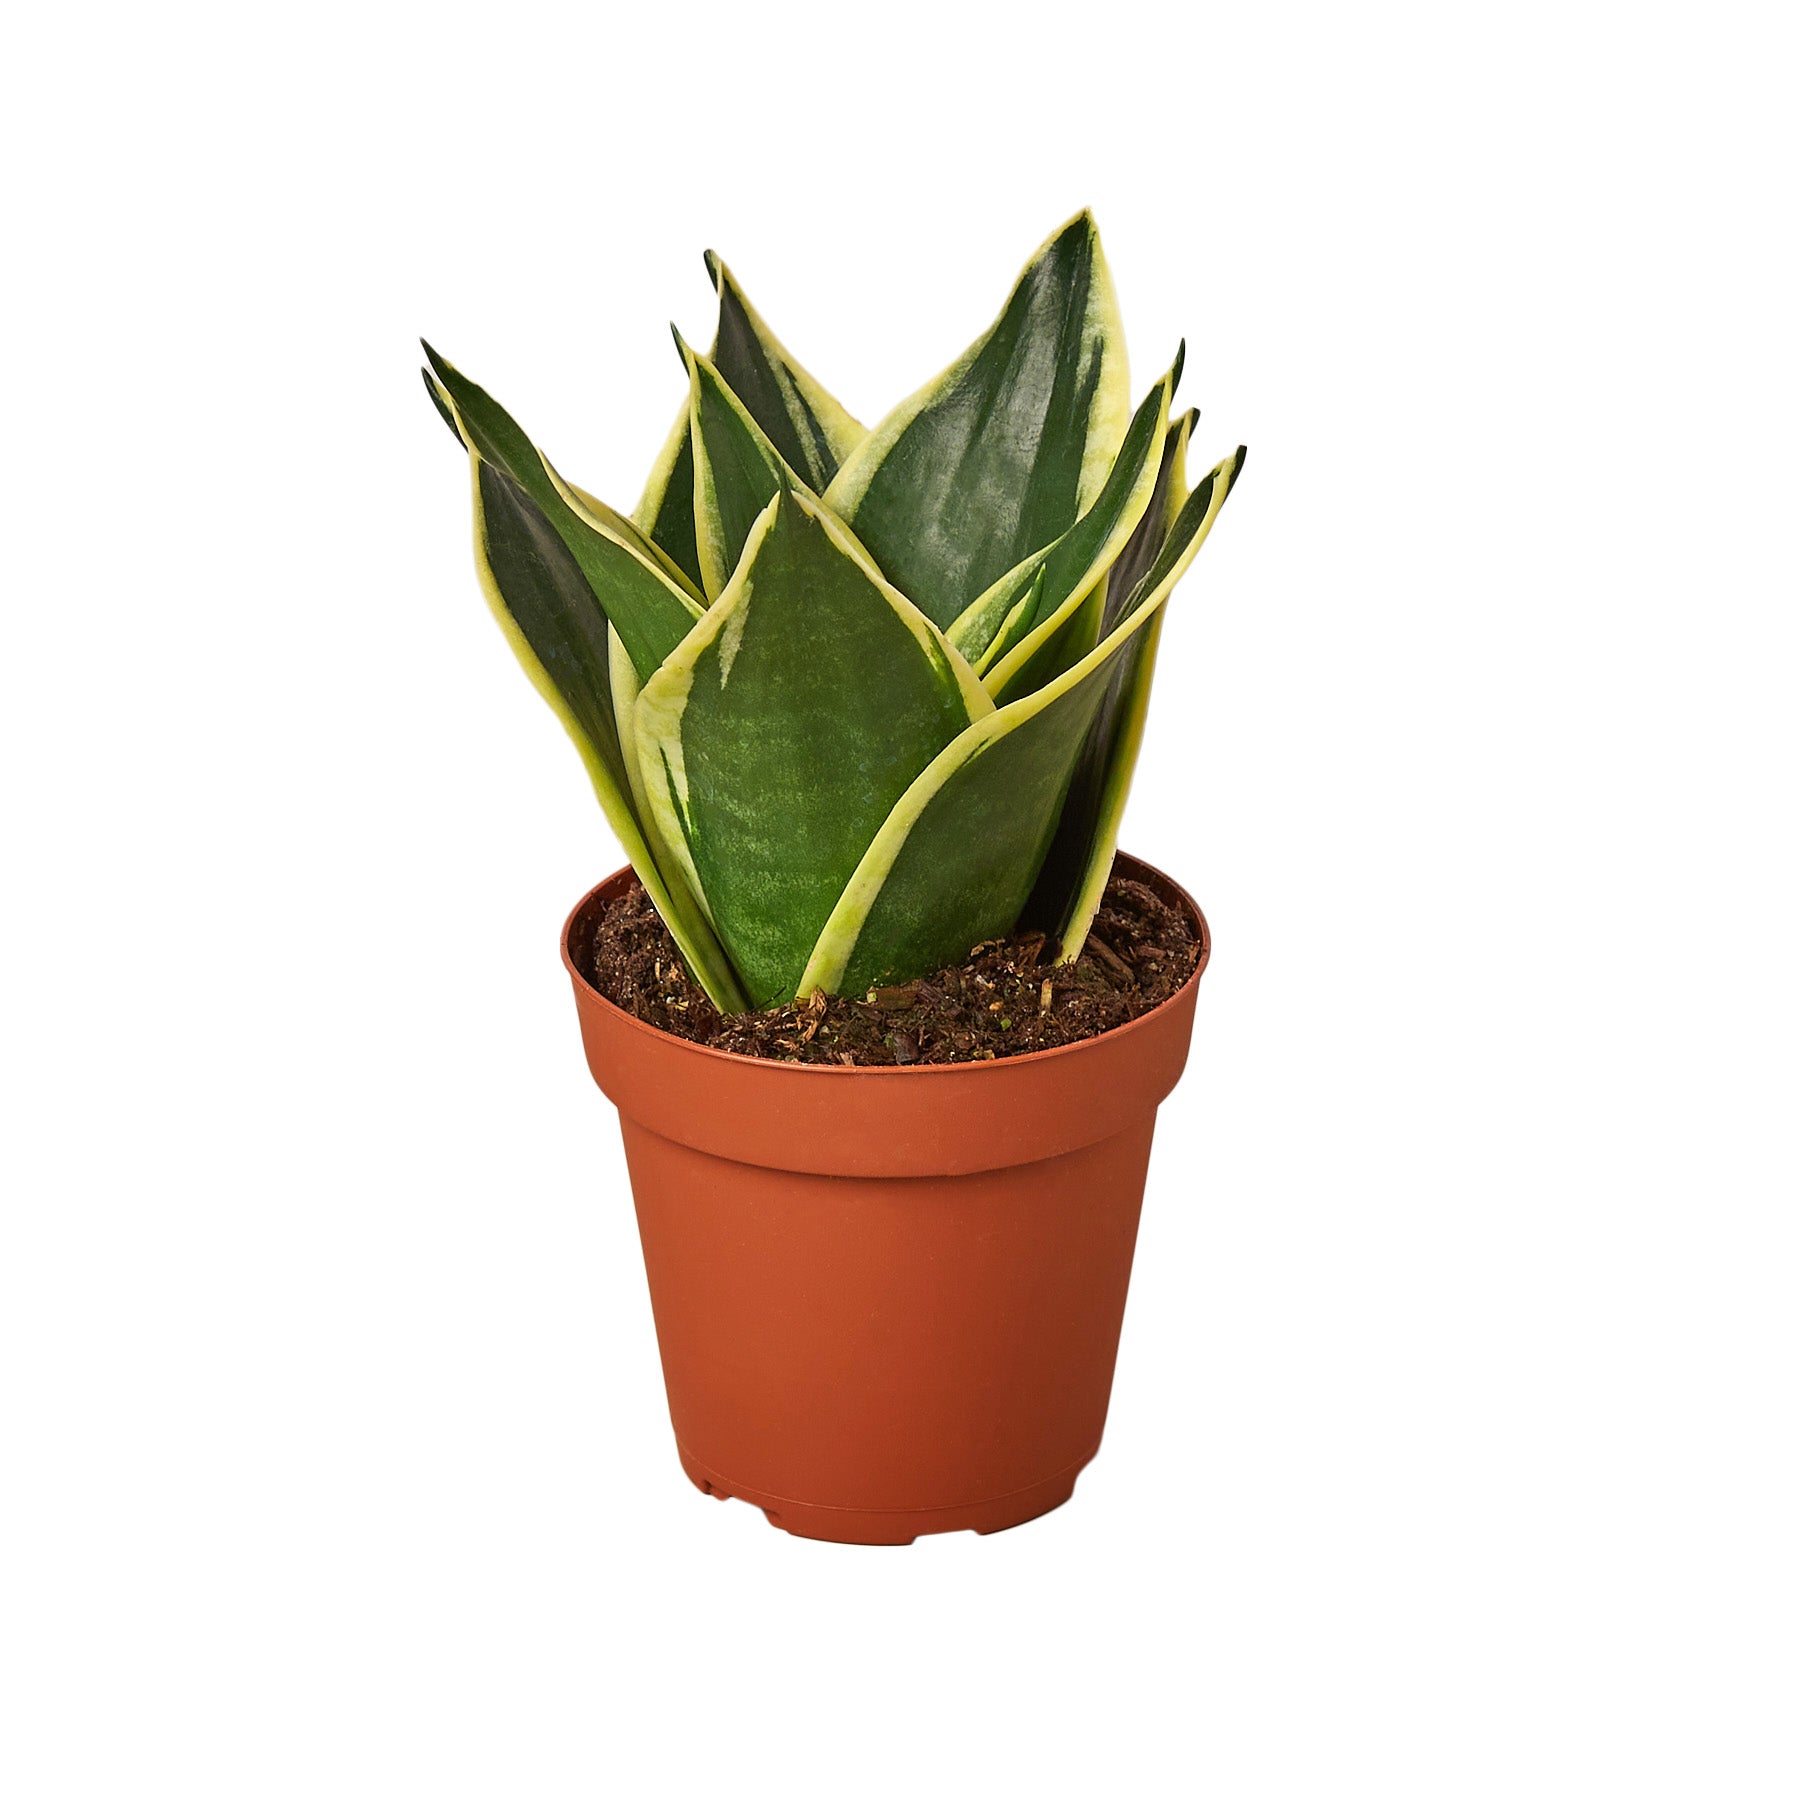 Aloe vera plant in a pot on a white background available at a nearby plant nursery.